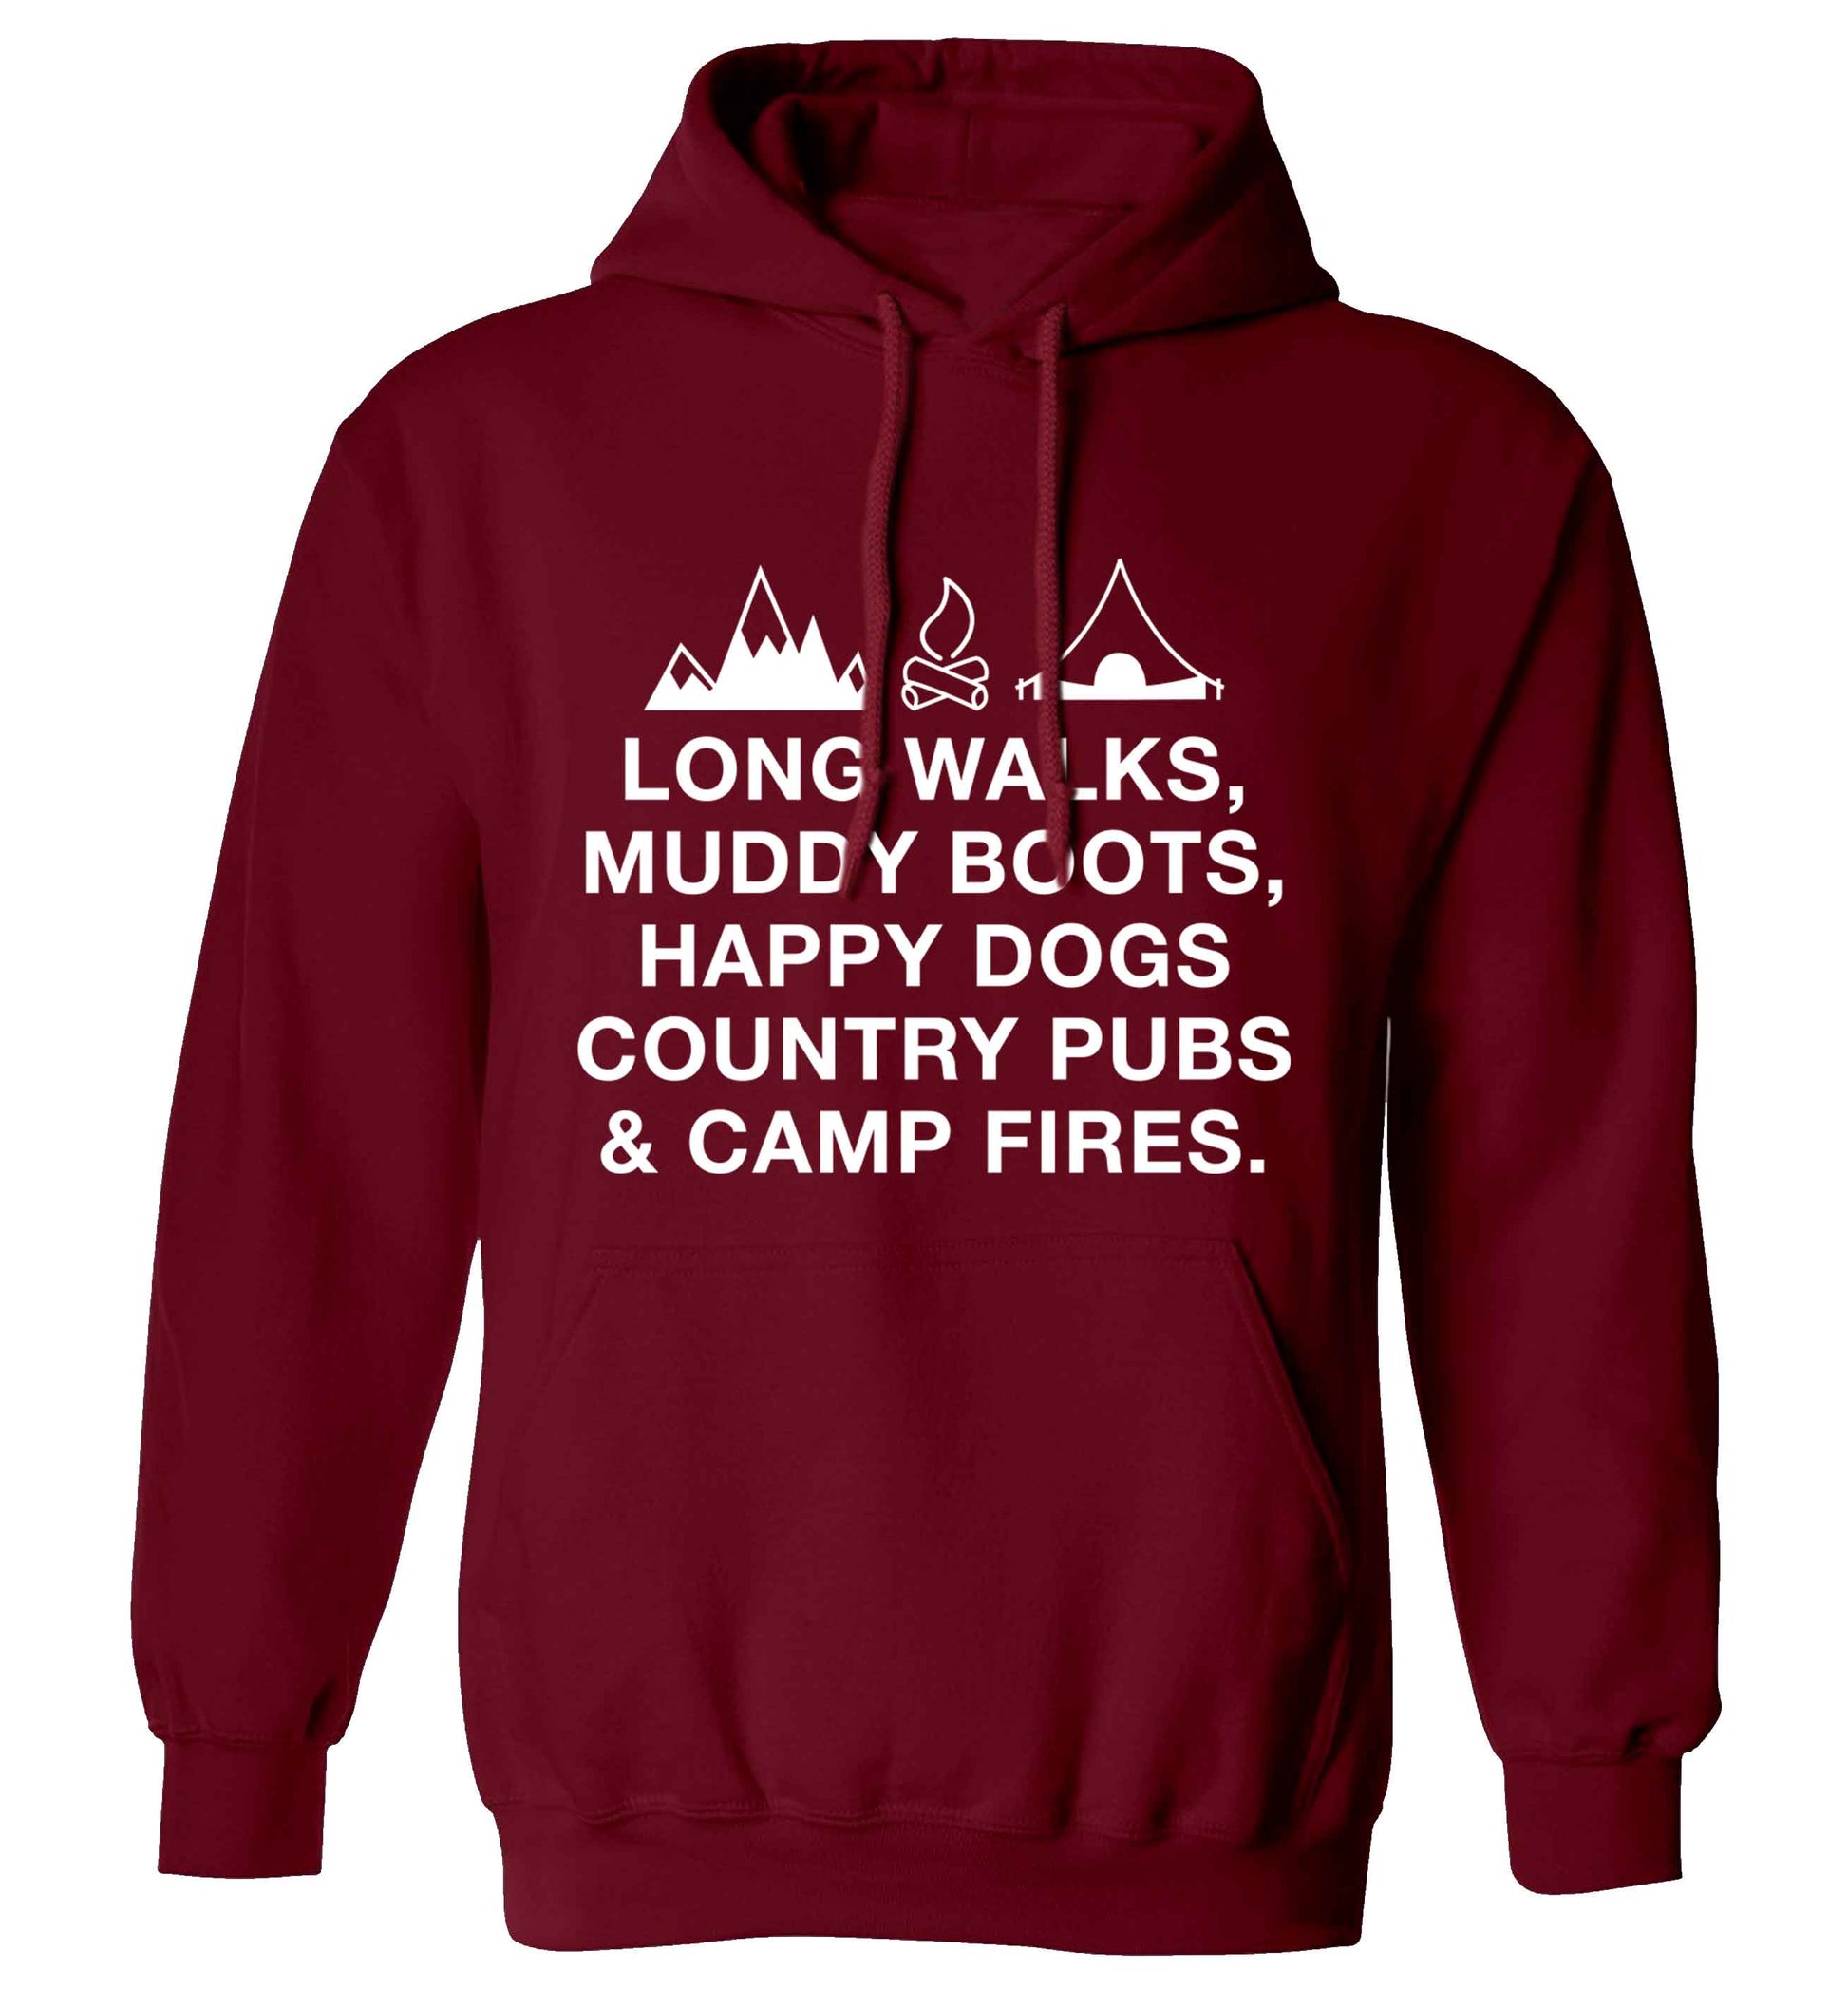 Long walks muddy boots happy dogs country pubs and camp fires adults unisex maroon hoodie 2XL